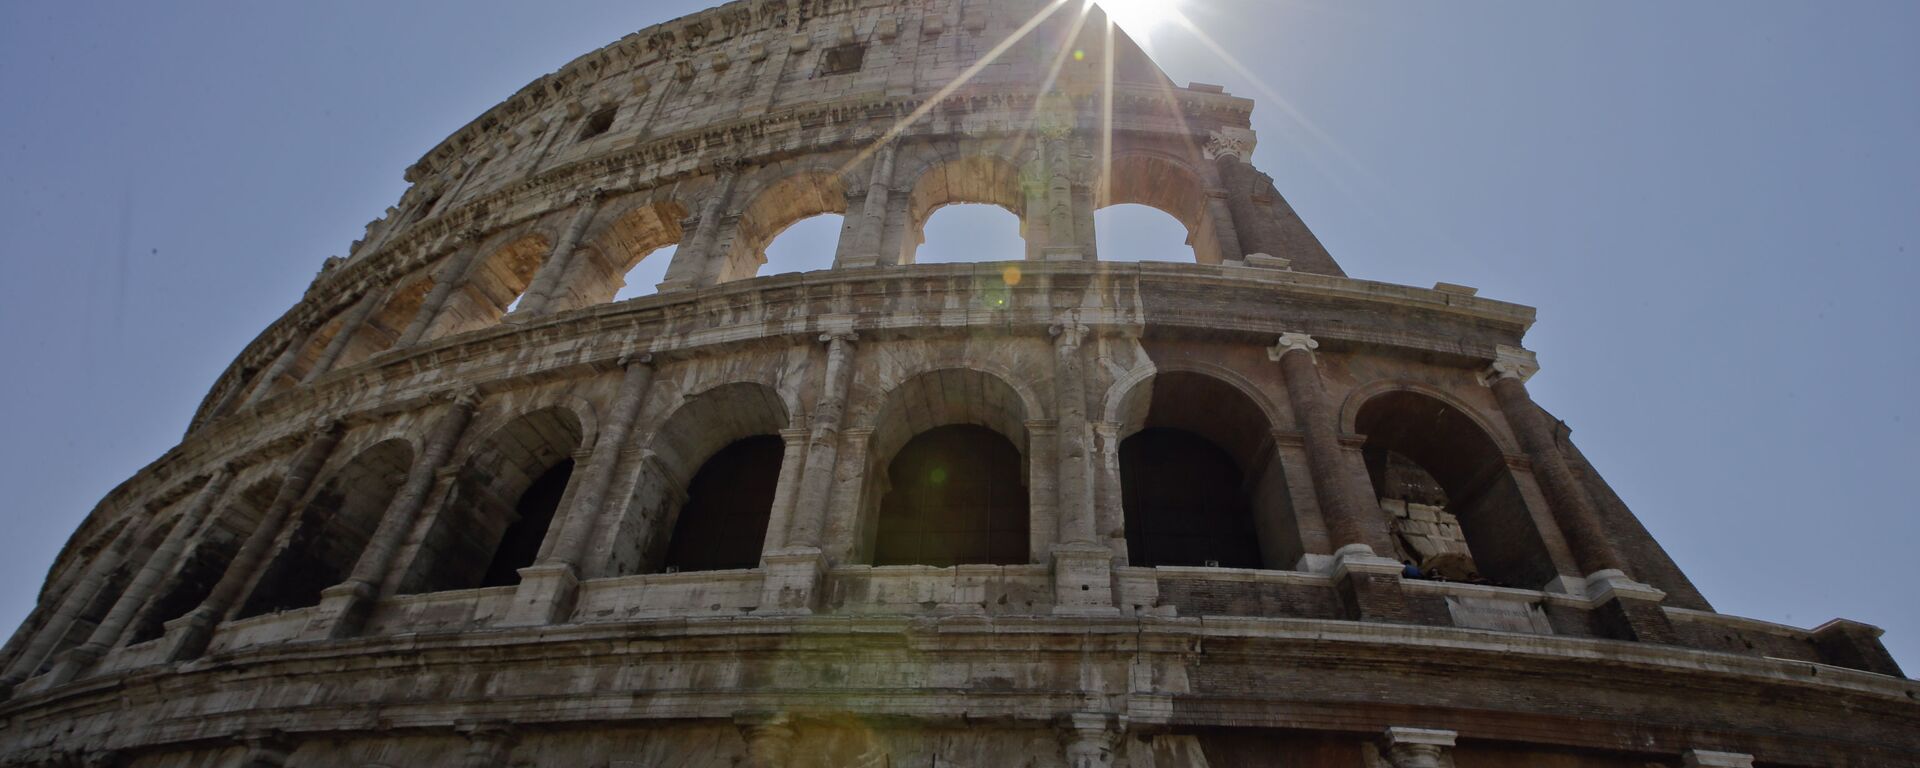 A view of the Colosseum after the first stage of the restoration work was completed in Rome, Friday, July 1st, 2016. The Colosseum has emerged more imposing than ever after its most extensive restoration, a multi-million-euro cleaning to remove a dreary, undignified patina of soot and grime from the ancient arena, assailed by pollution in traffic-clogged Rome. (AP Photo/Andrew Medichini) - Sputnik International, 1920, 07.01.2023